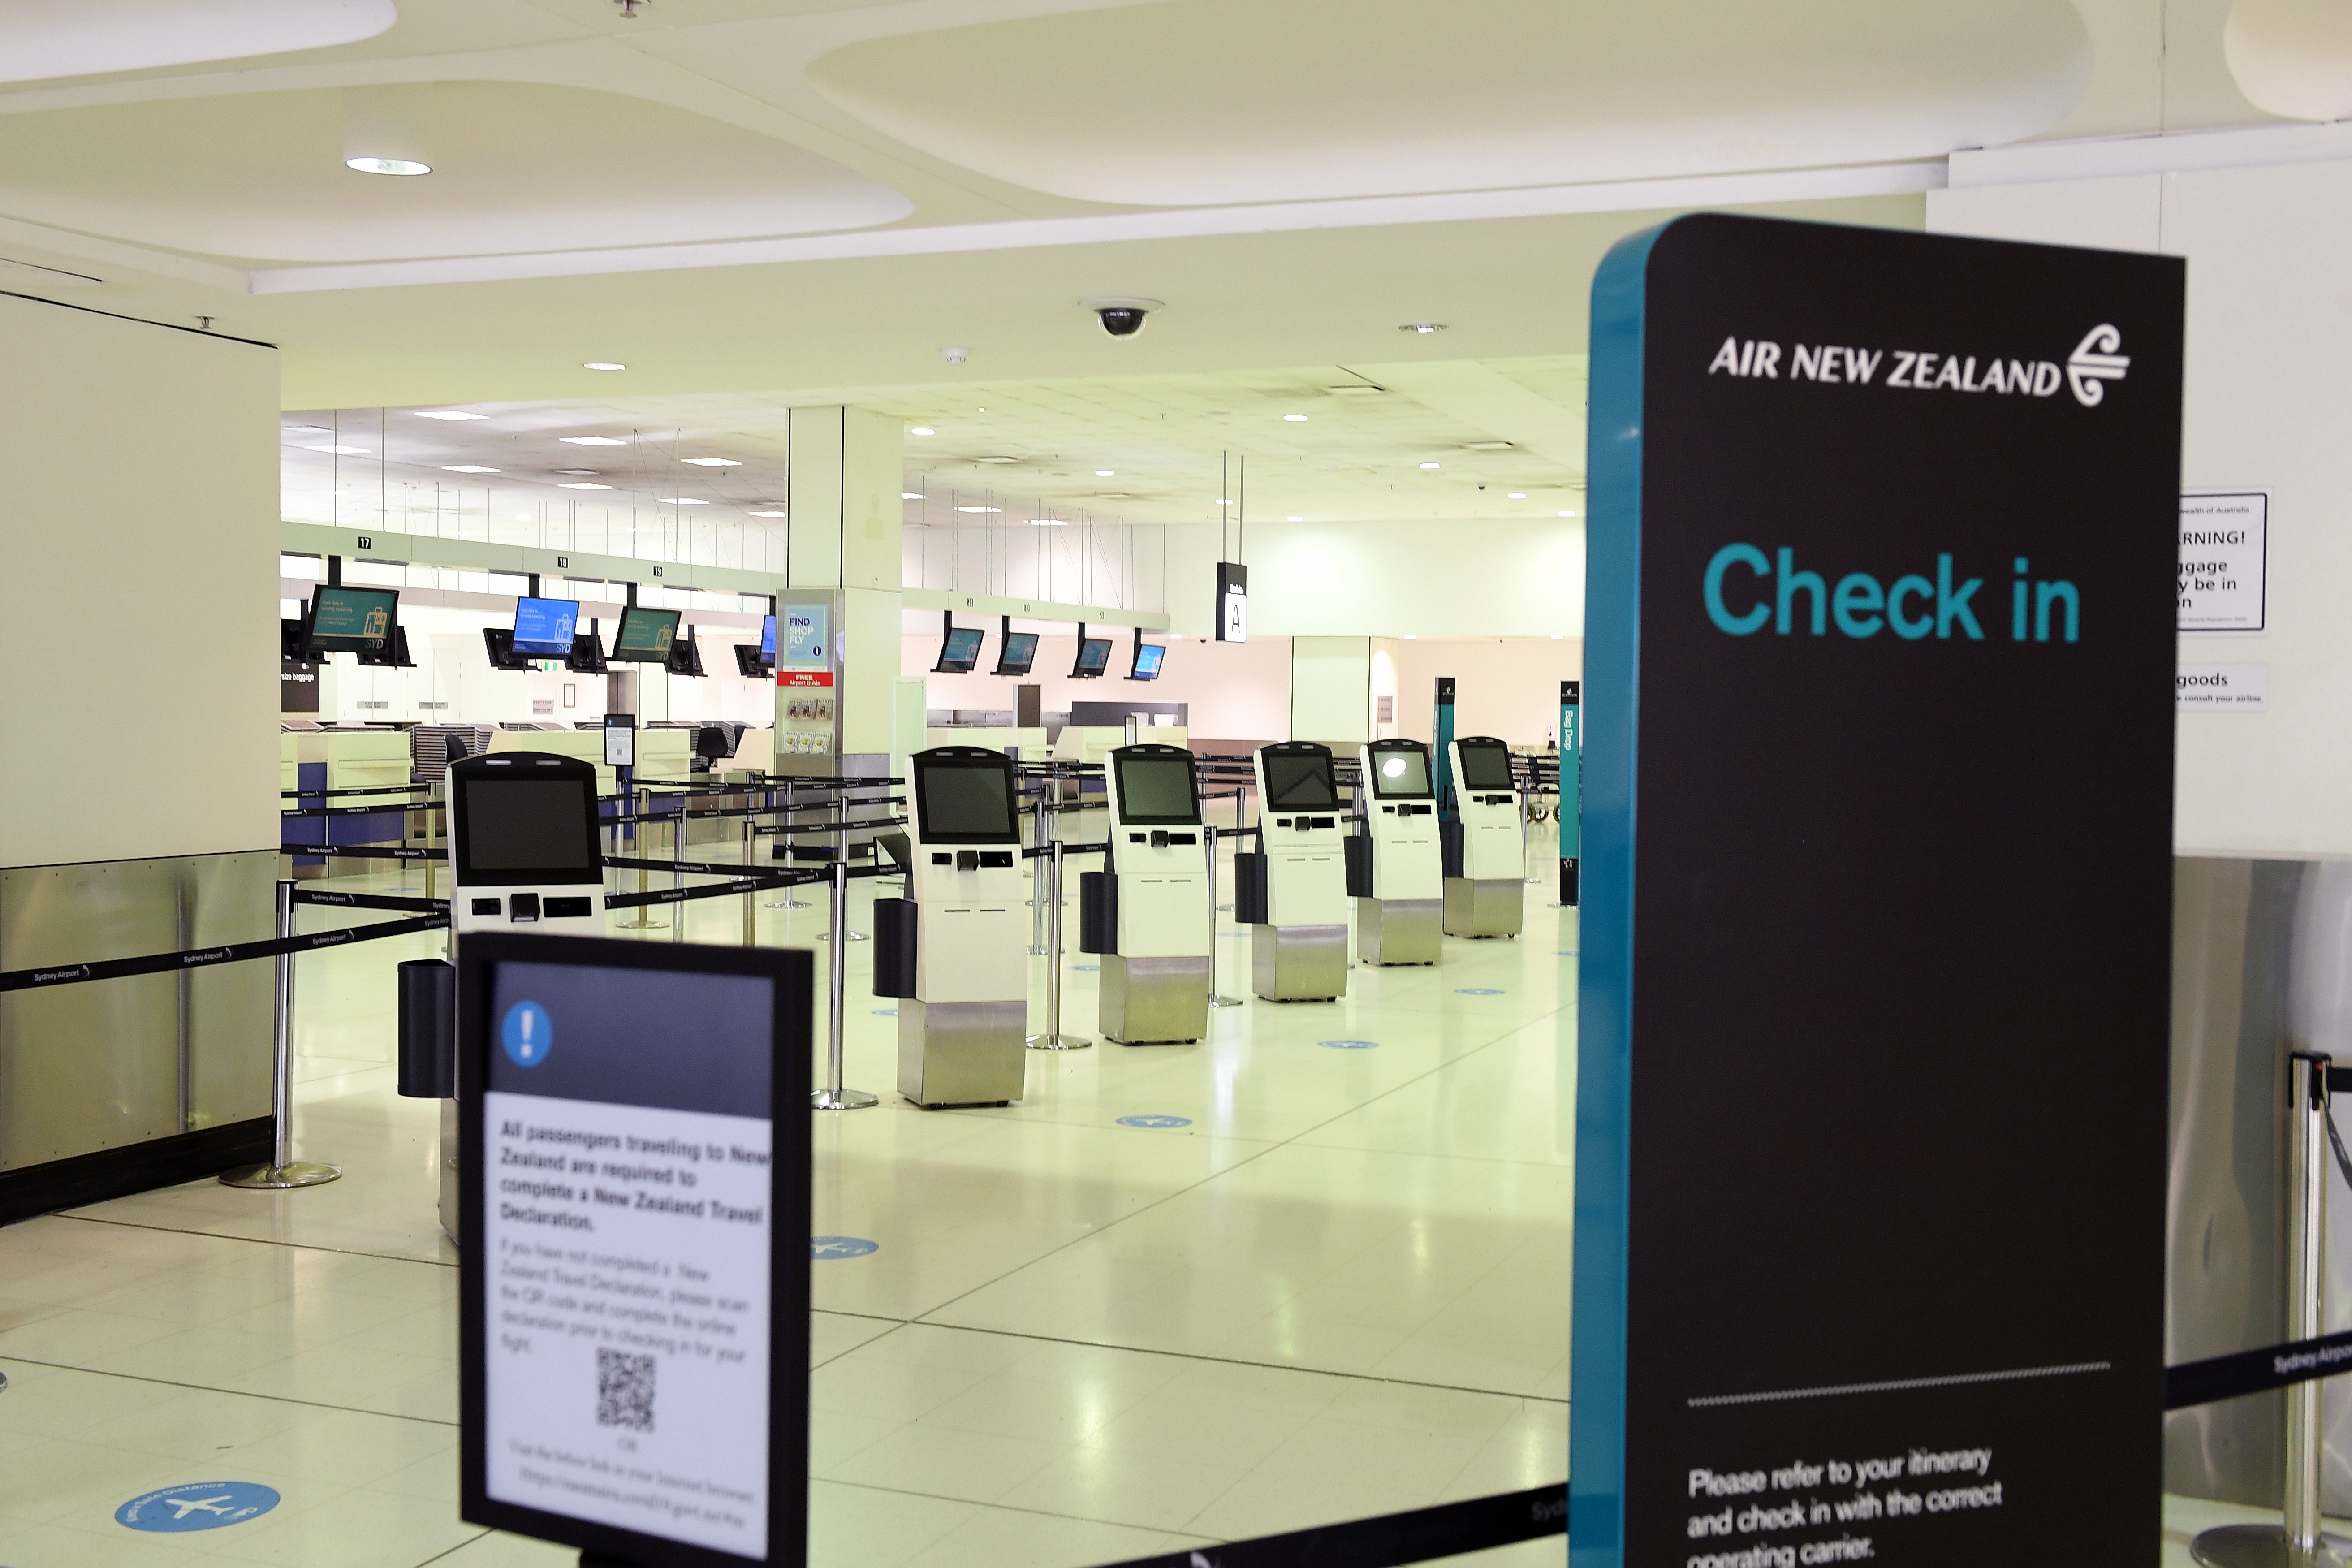 File photo: The Air New Zealand check in counter at Sydney International Airport in New South Wales, Australia, 23 June 2021